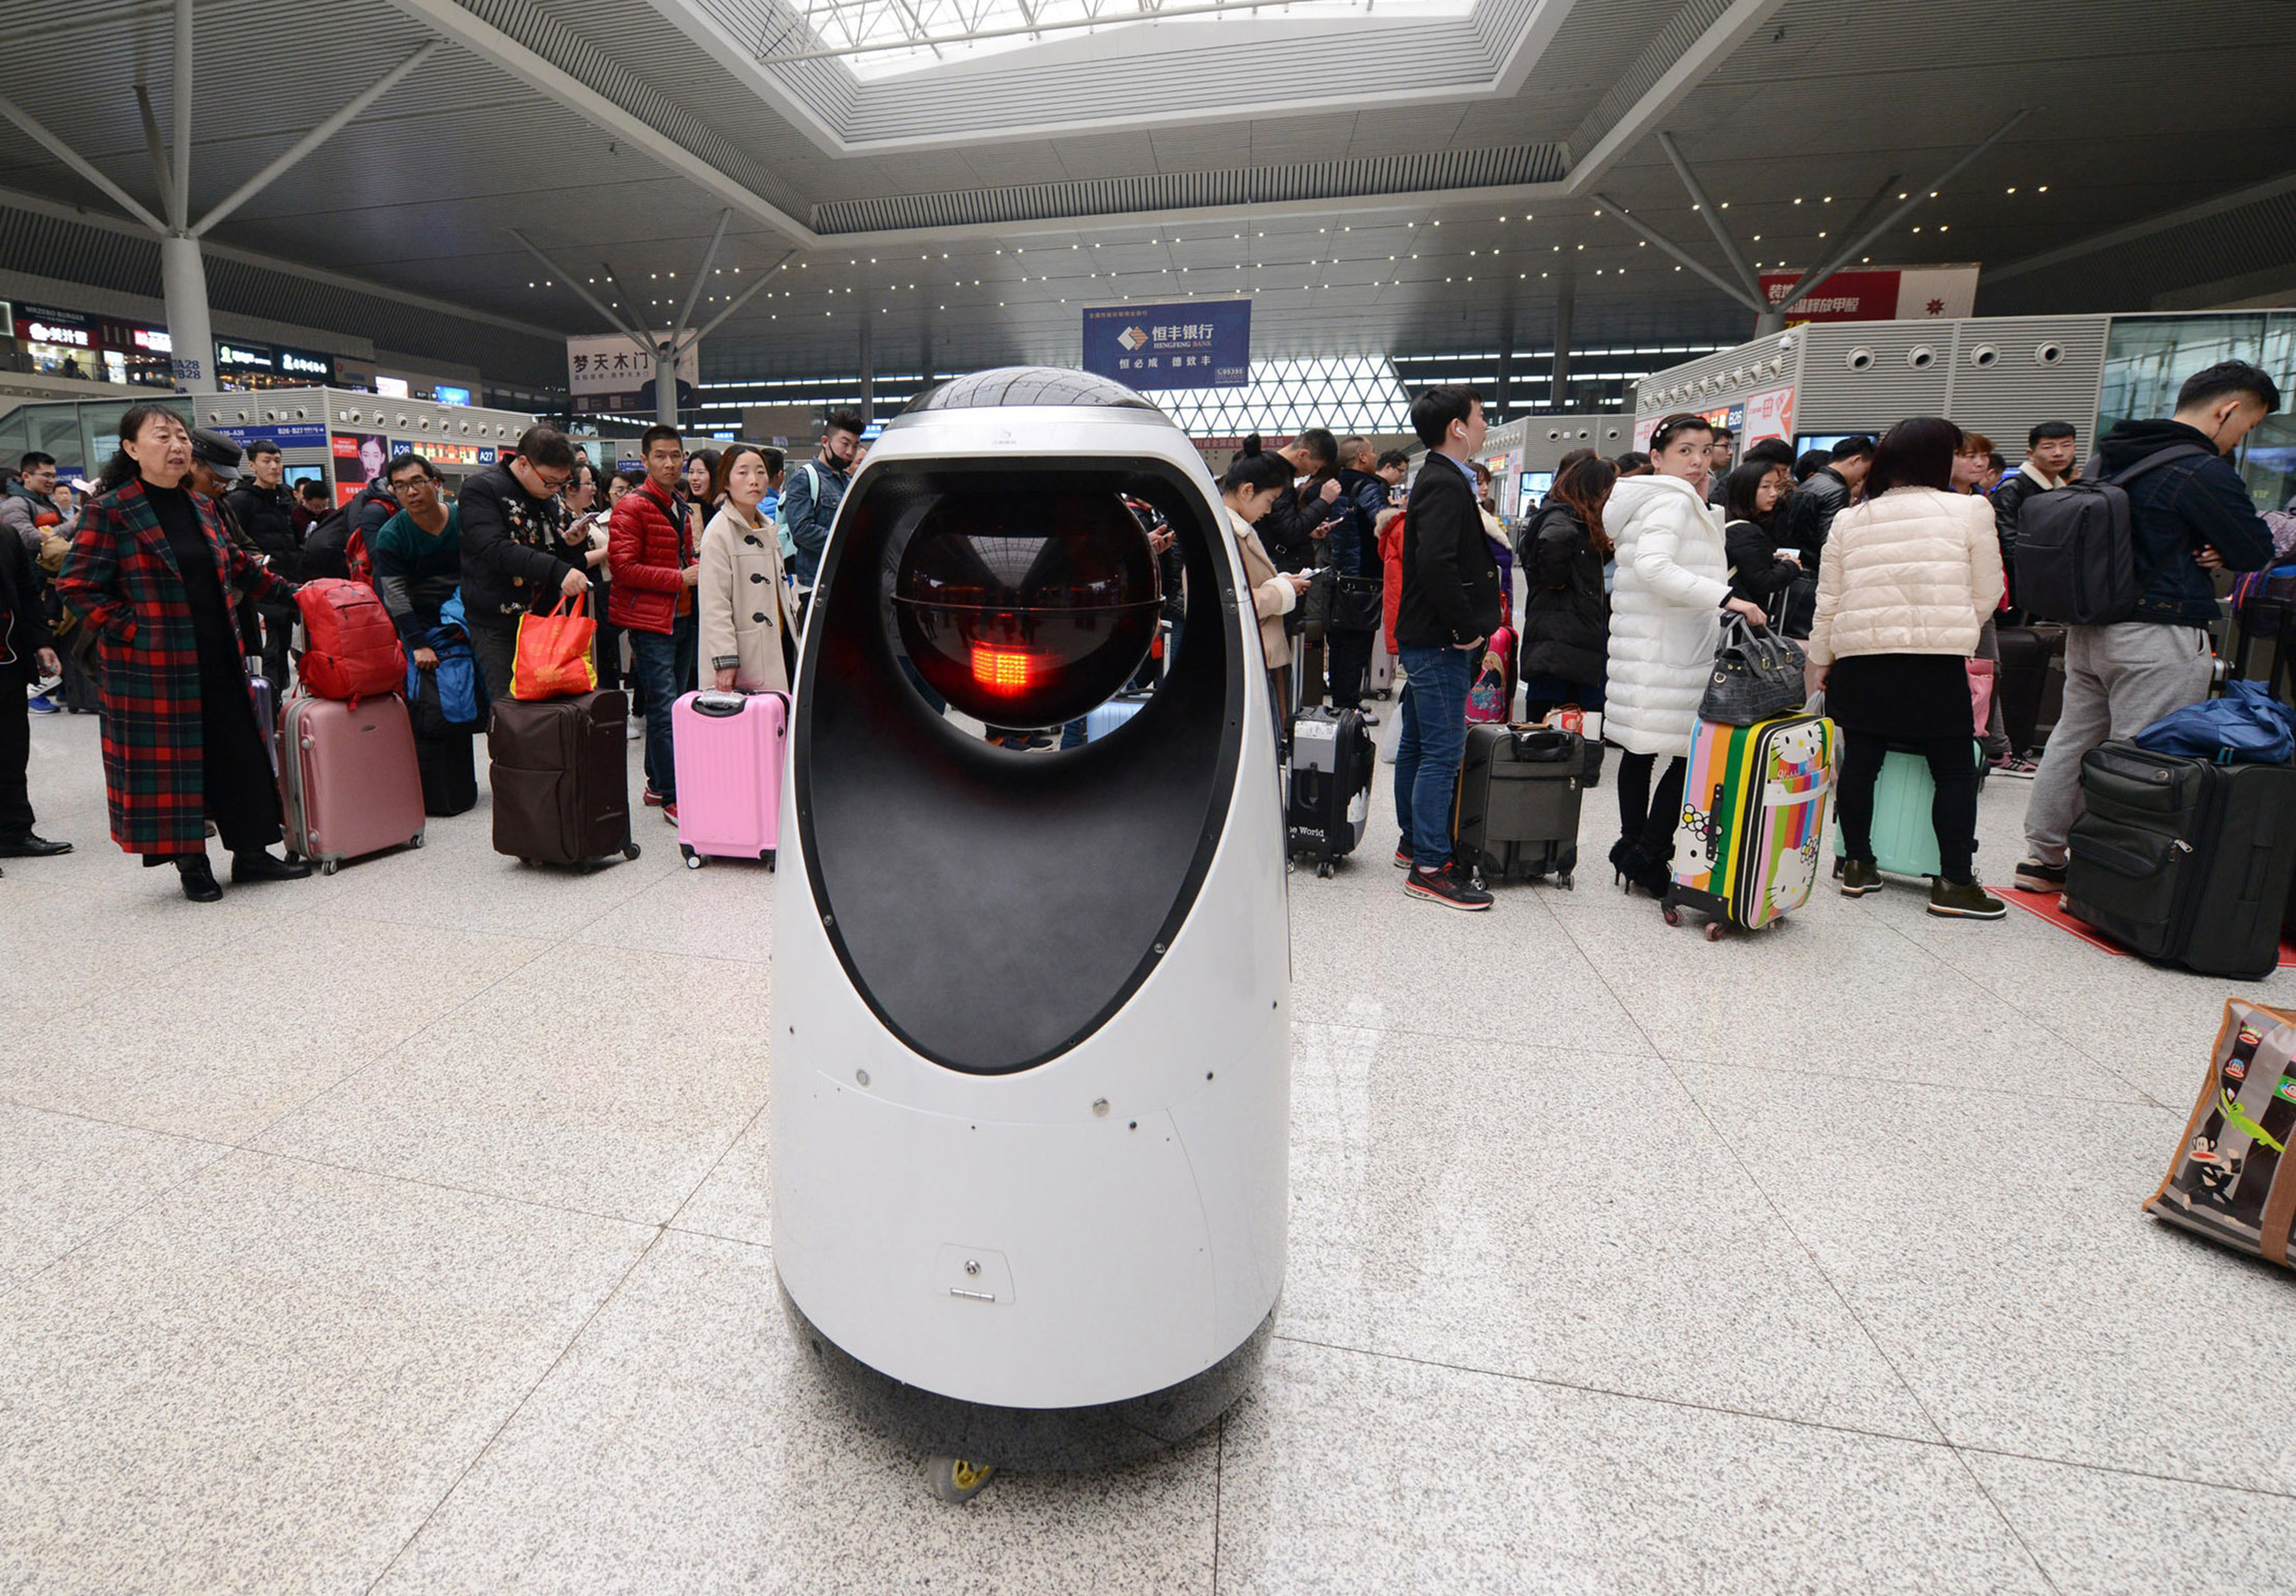 Passengers look at a police robot at Zhengzhou East Railway Station on February 15, 2017 in Zhengzhou, Henan Province of China. (Zhang Tao—VCG/Getty Images)